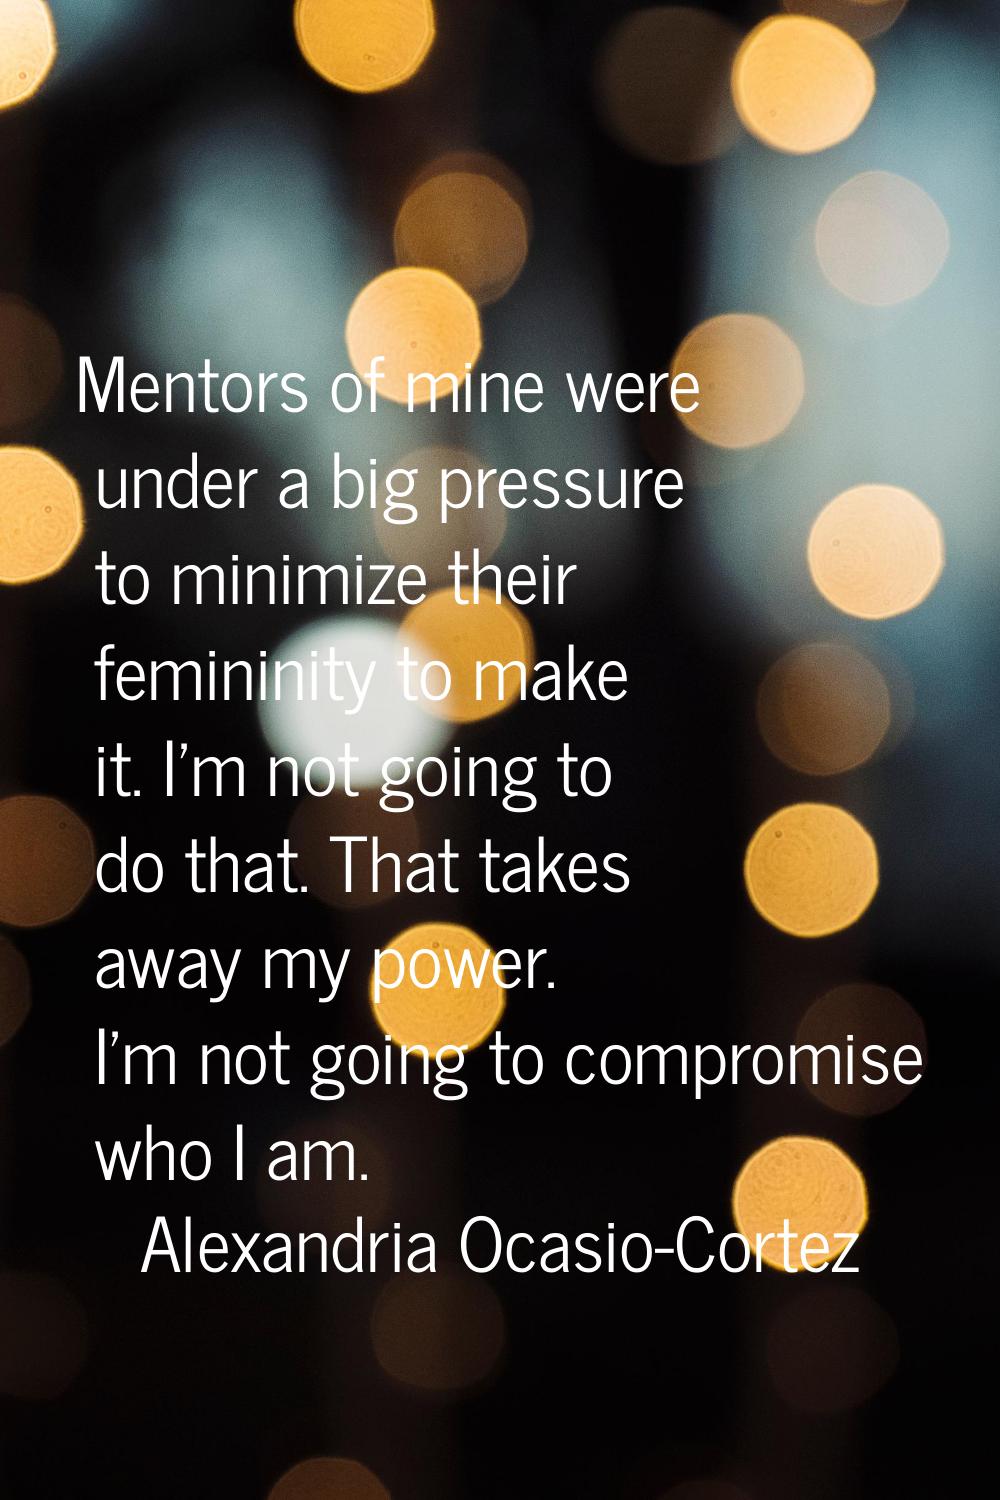 Mentors of mine were under a big pressure to minimize their femininity to make it. I'm not going to